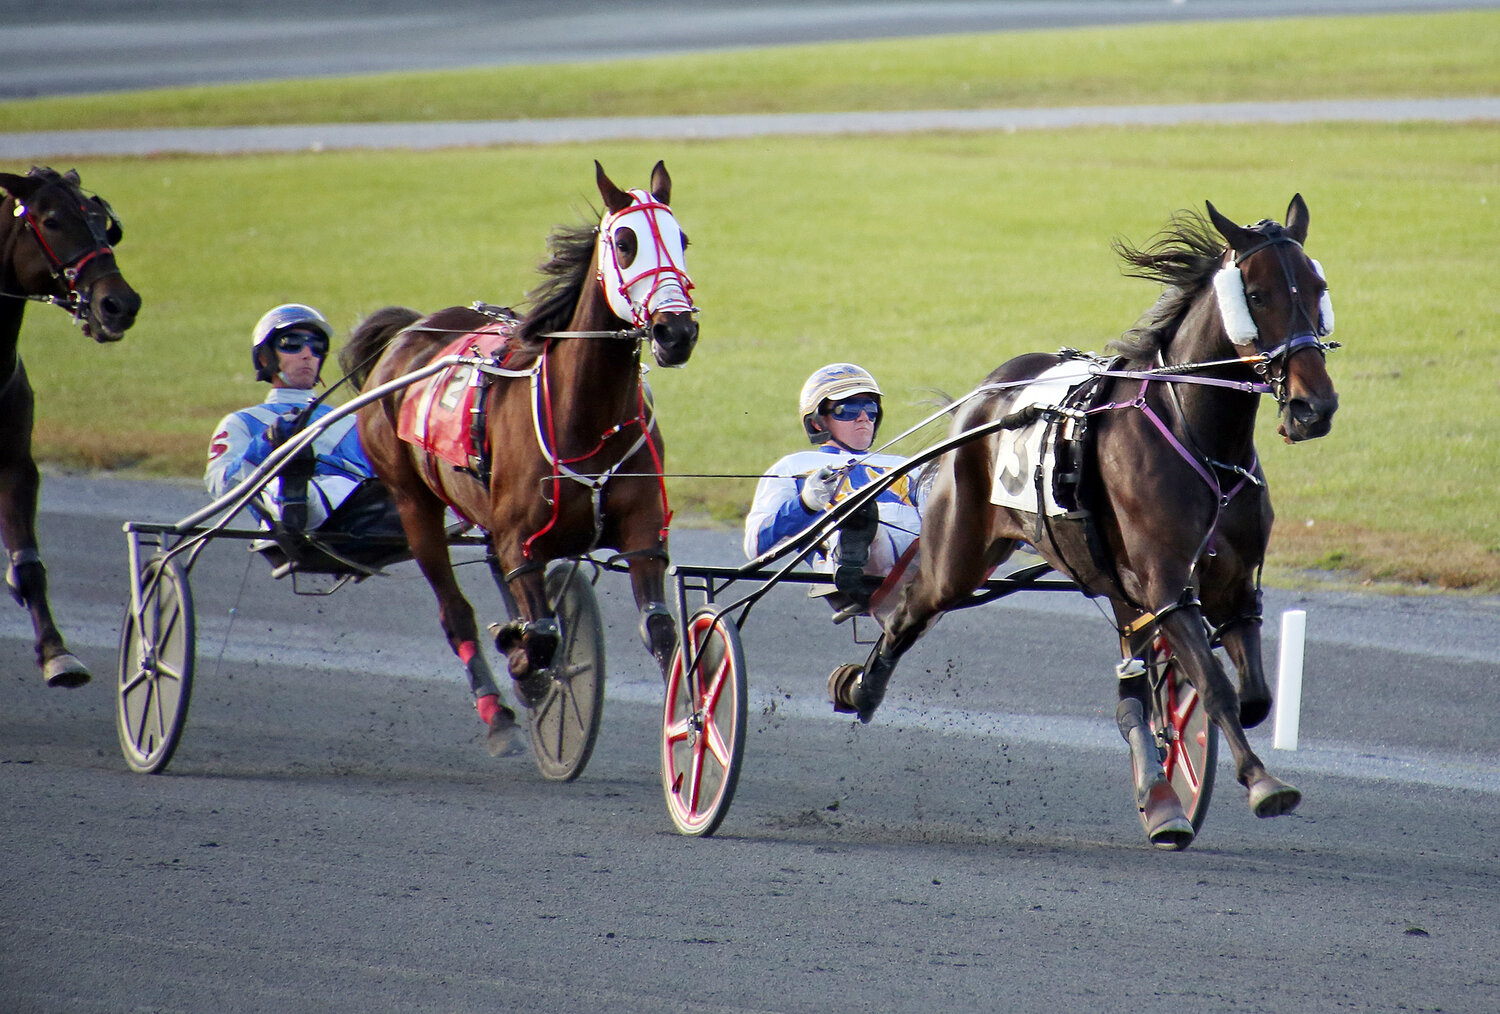 Kim's Command, driven by Russell Foster, leads Unbelievable Kemp,  driven by Art Stafford Jr., at the half of the second race Wednesday at Harrington Raceway. Unbelievable Kemp won the race in 1:59 and paid $11 to win.